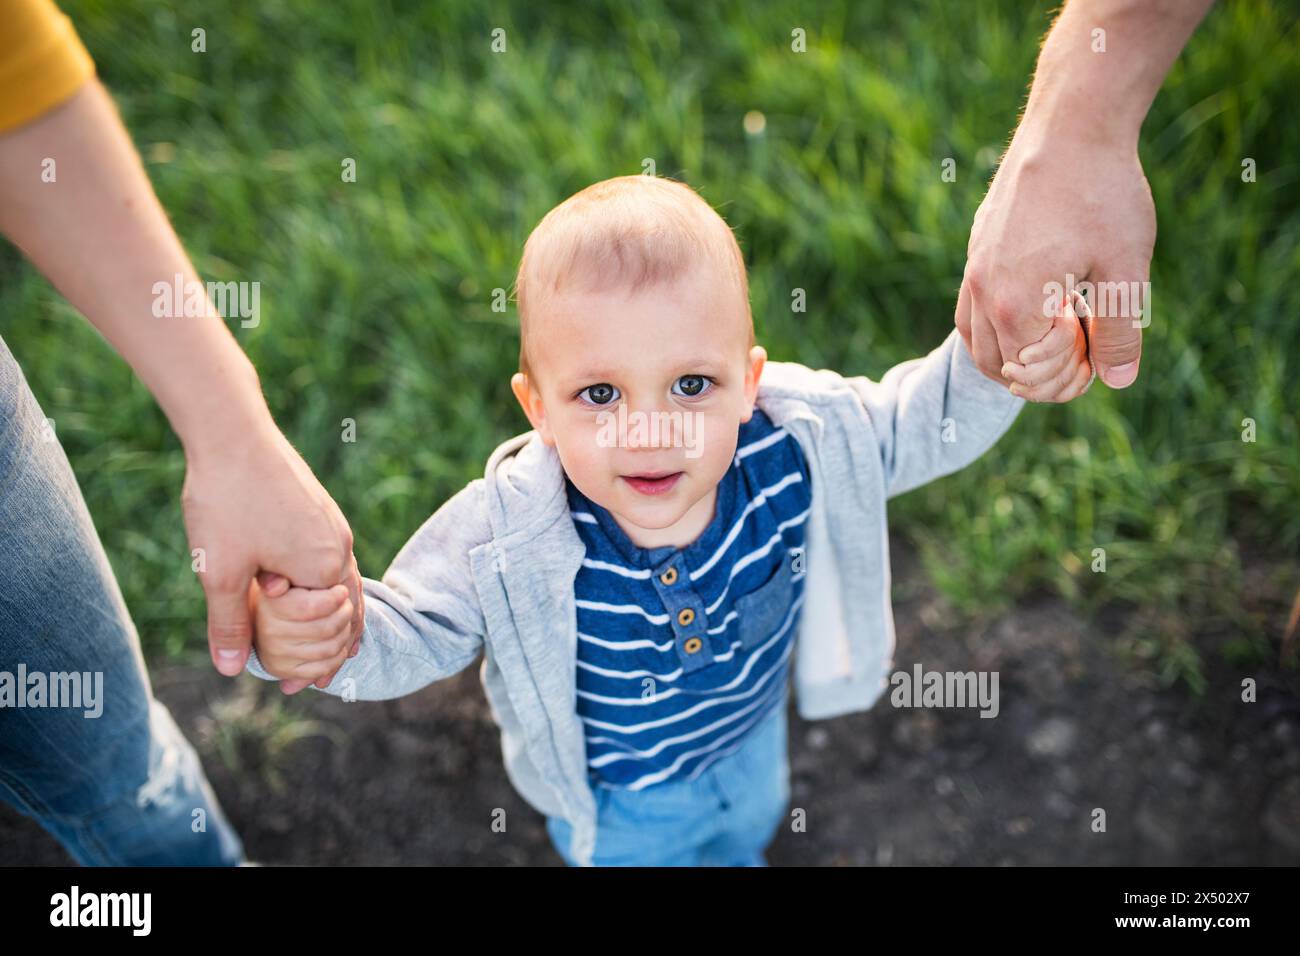 New parents holding small toddler, by hands, swinging him. Family outdoors on walk in spring nature. Happy family moment Stock Photo